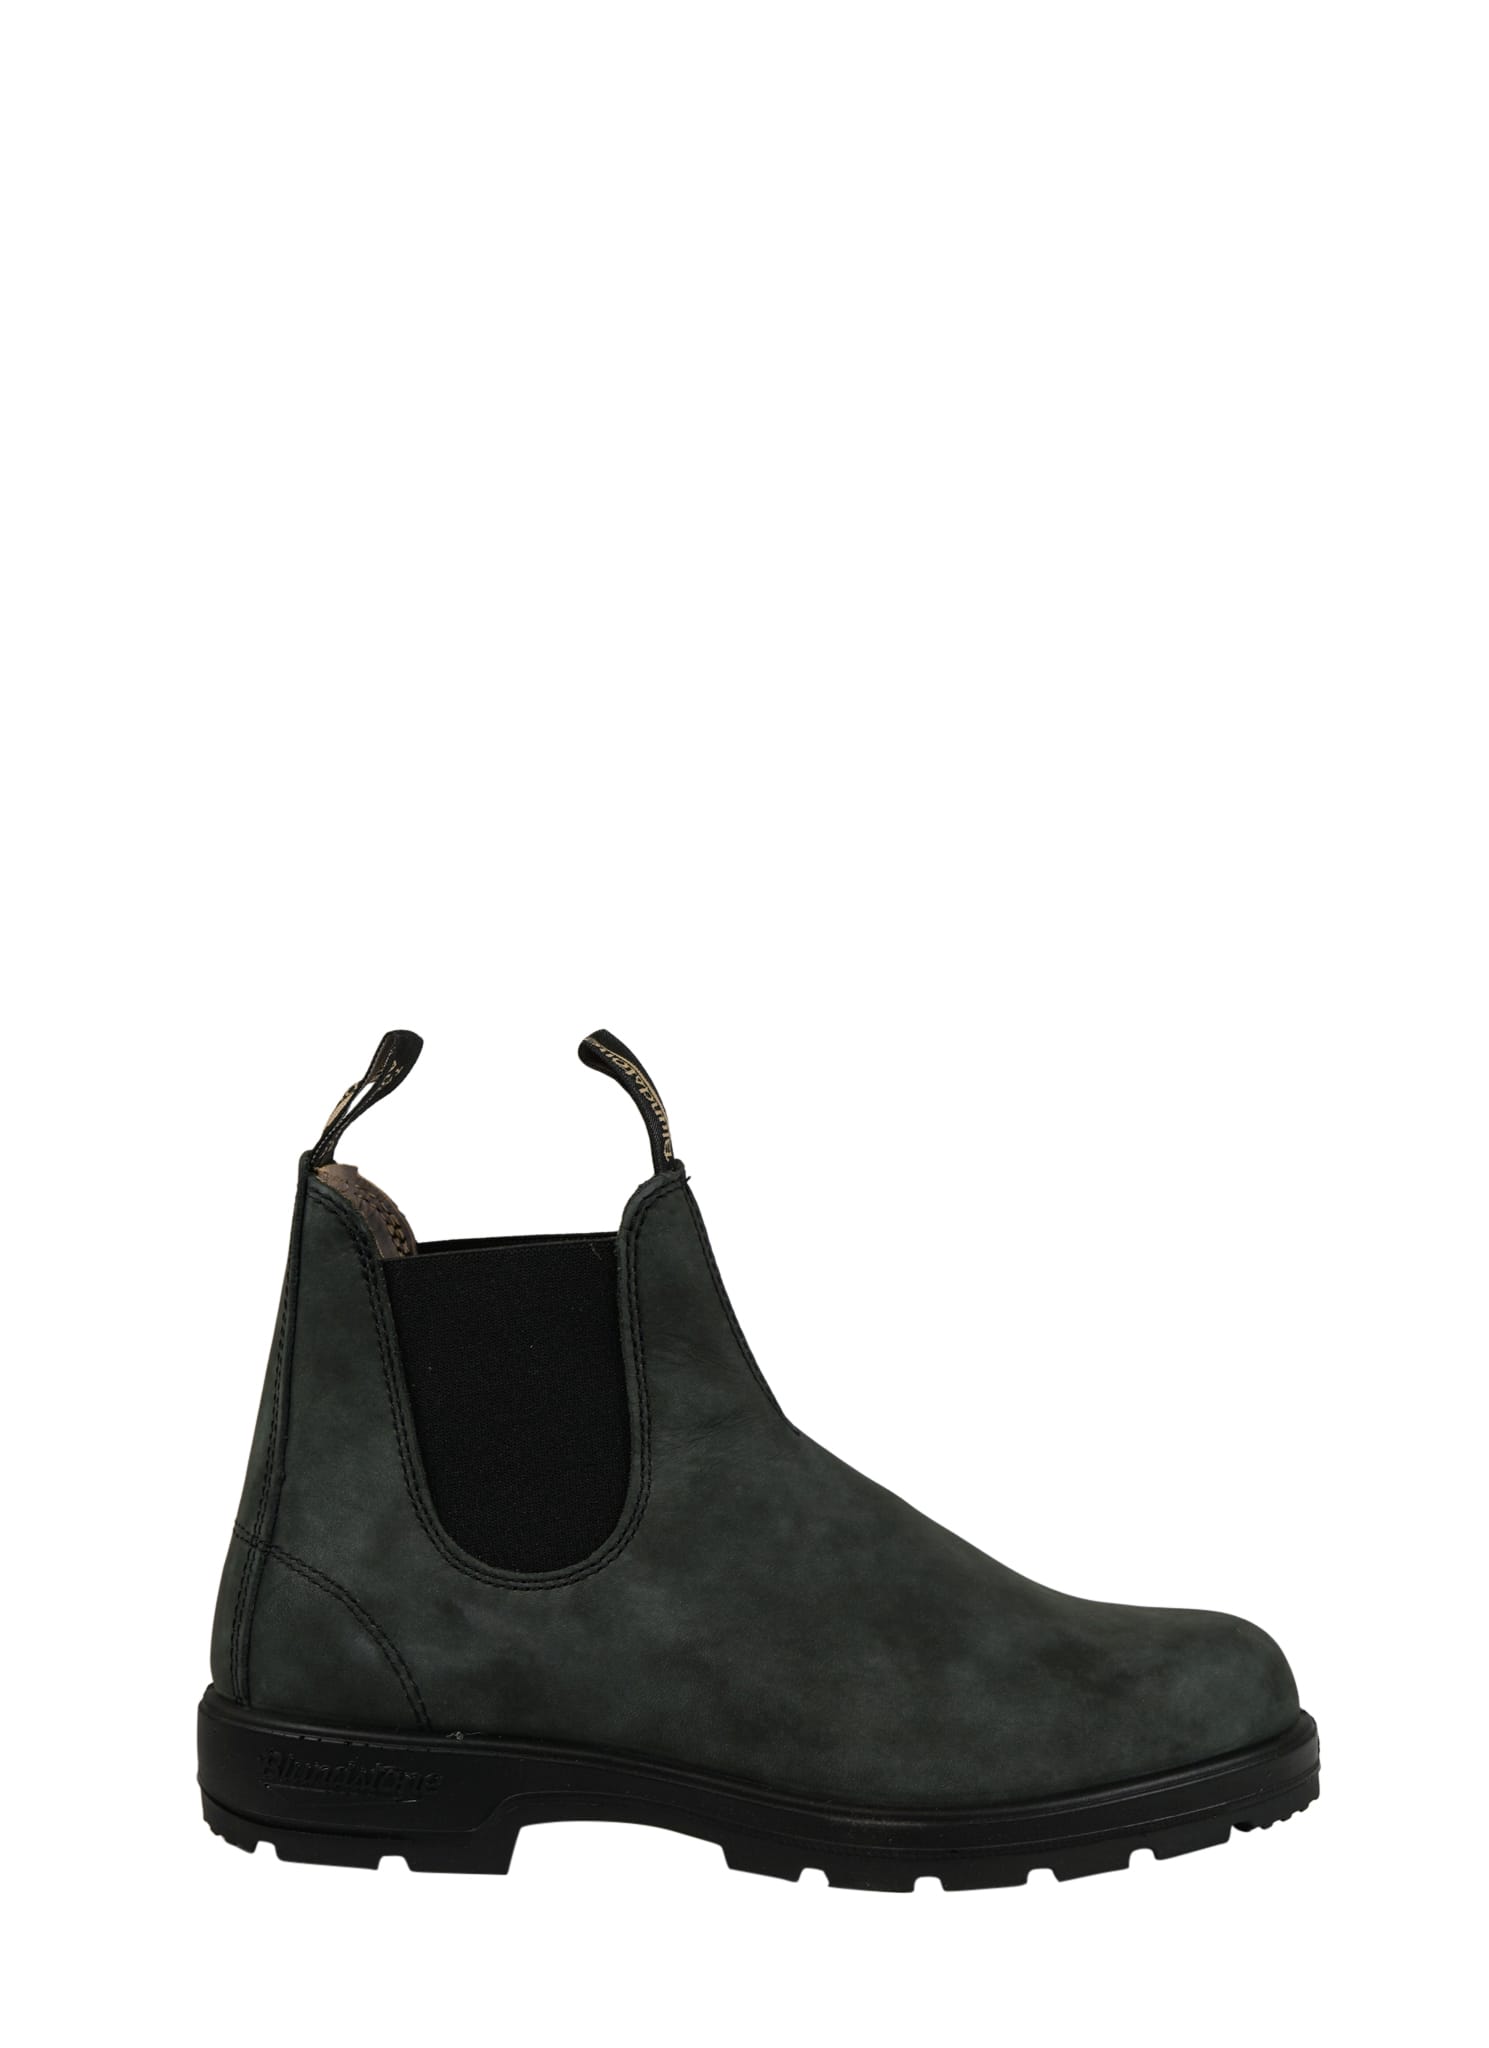 Blundstone Chelsea Boots Boots